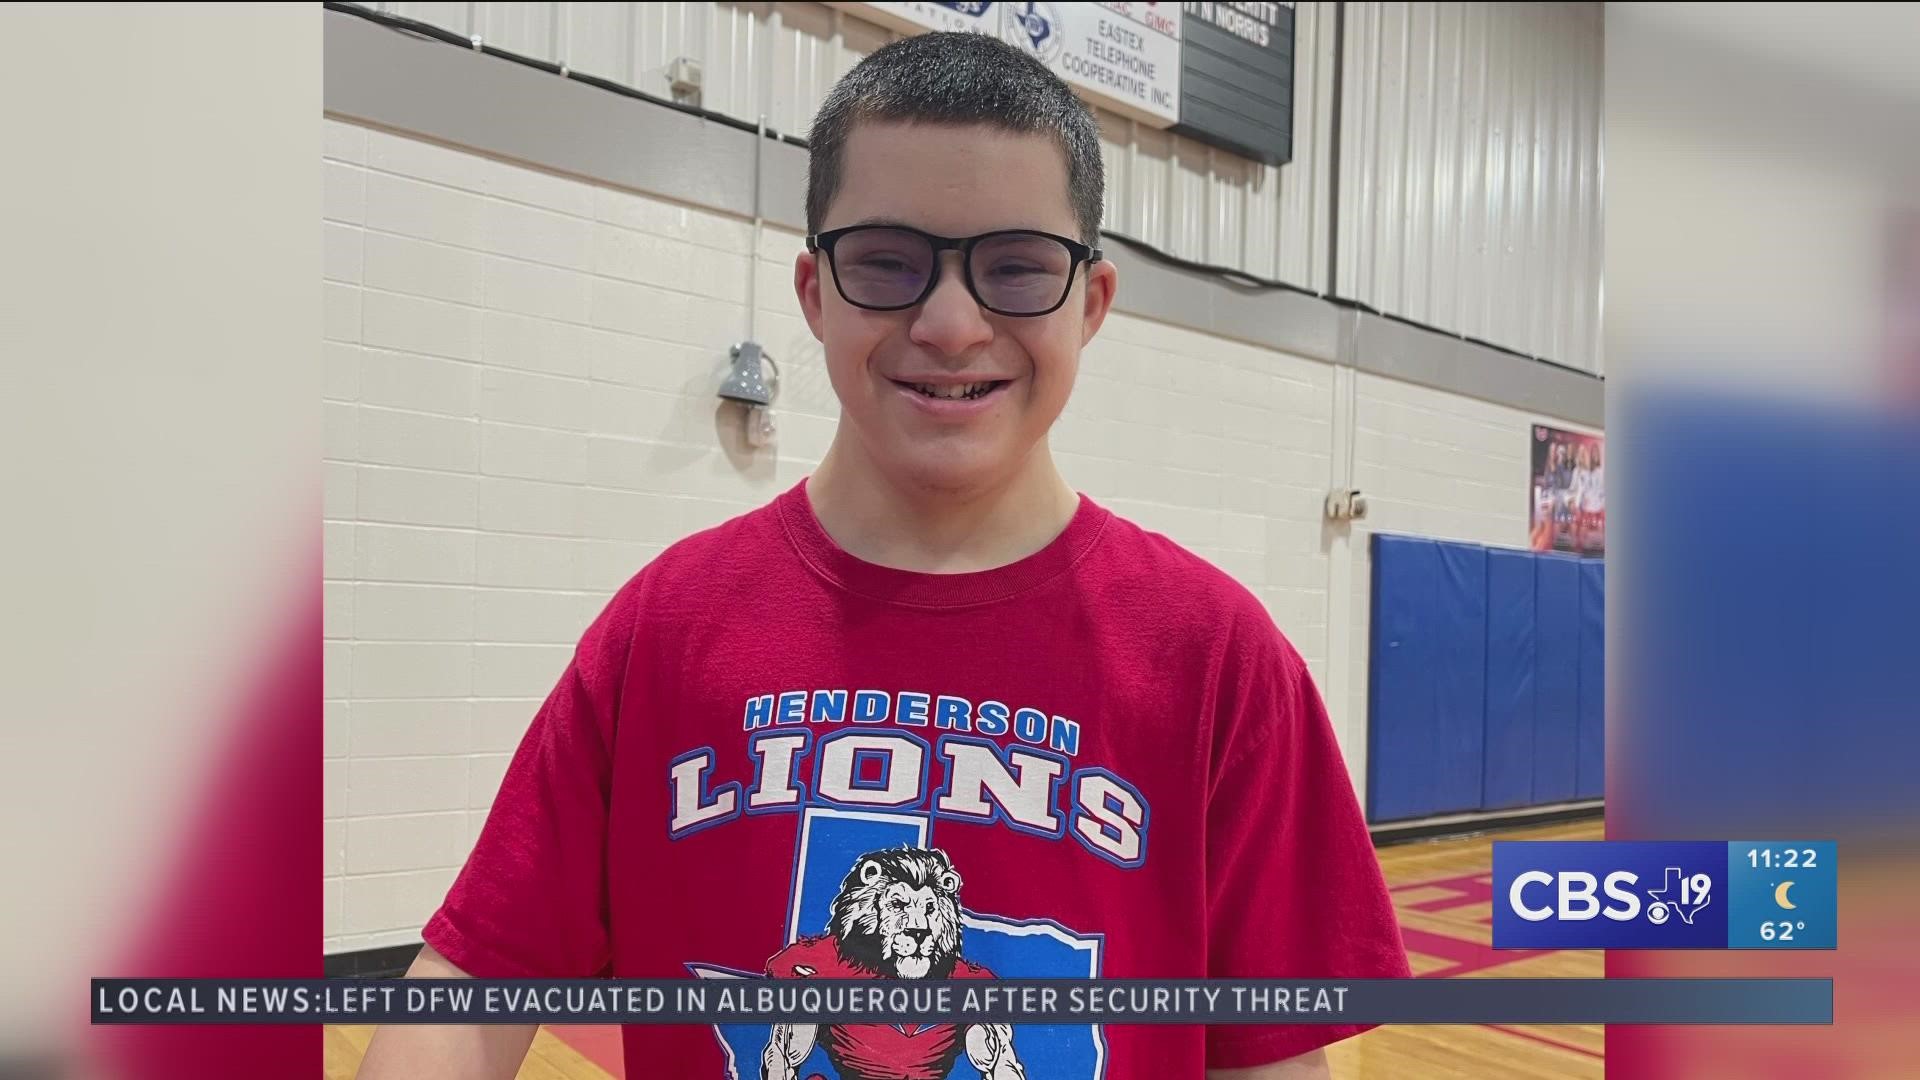 The Henderson ISD student athlete has inspired many with his athletic achievements.